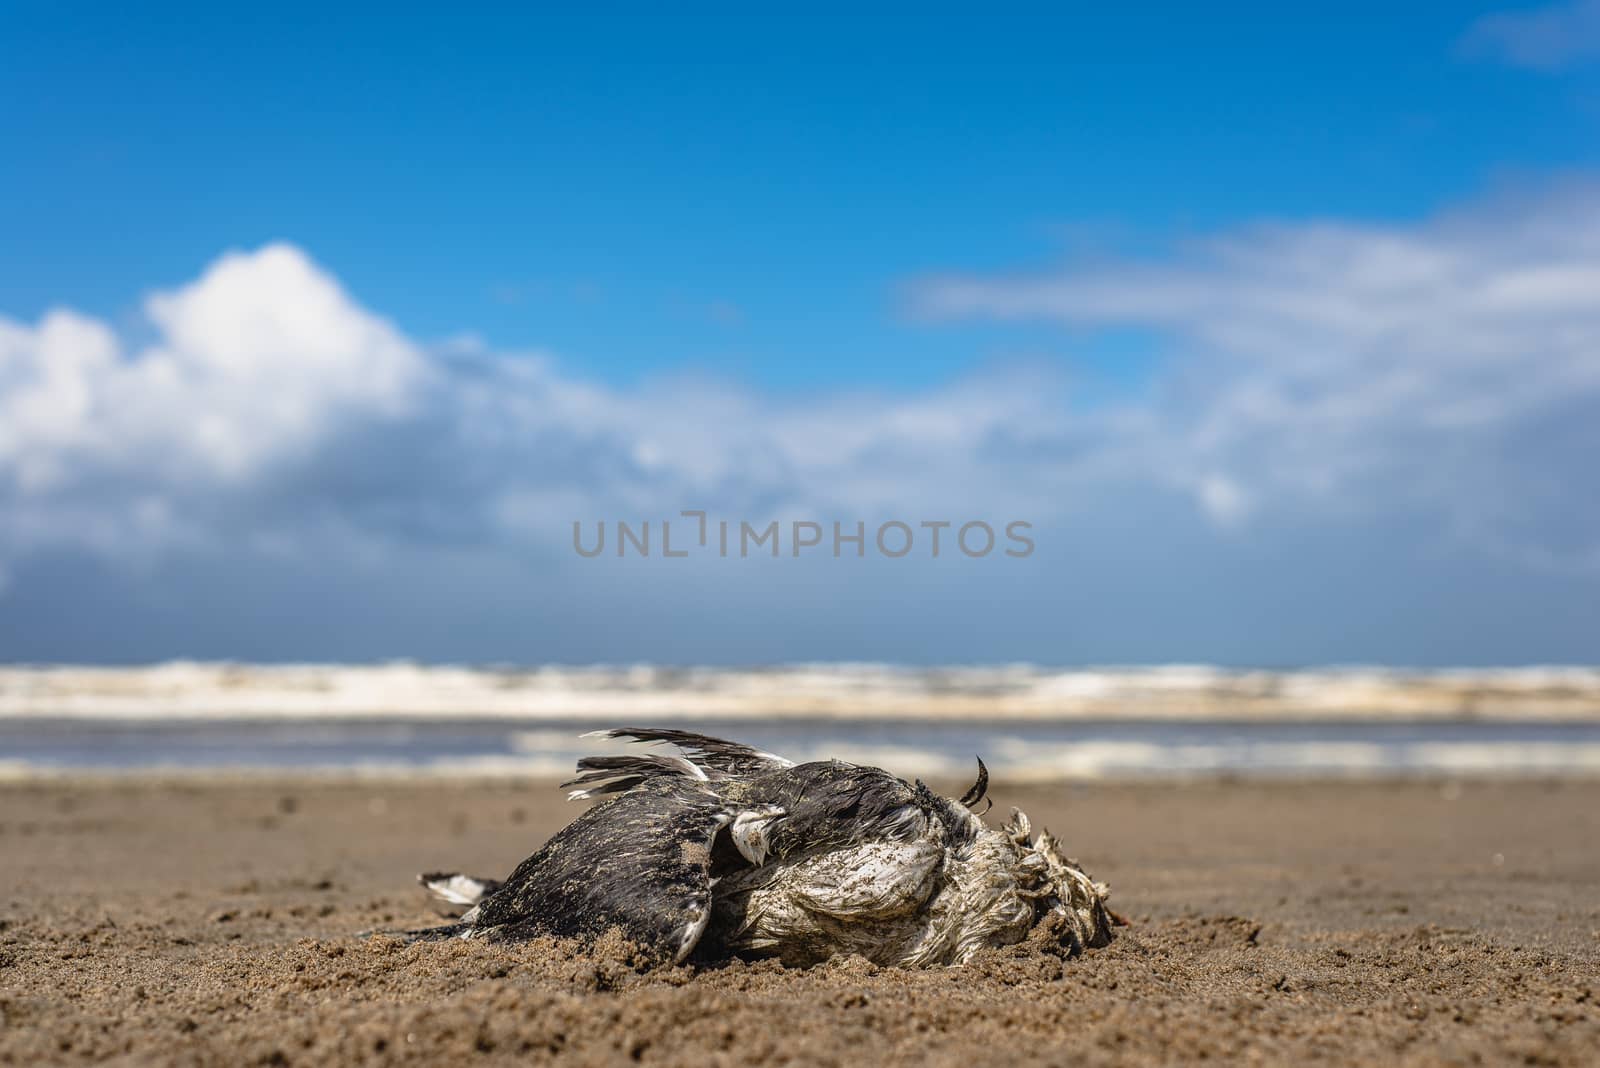 A dead seagull laying on a sandy beach by Pendleton